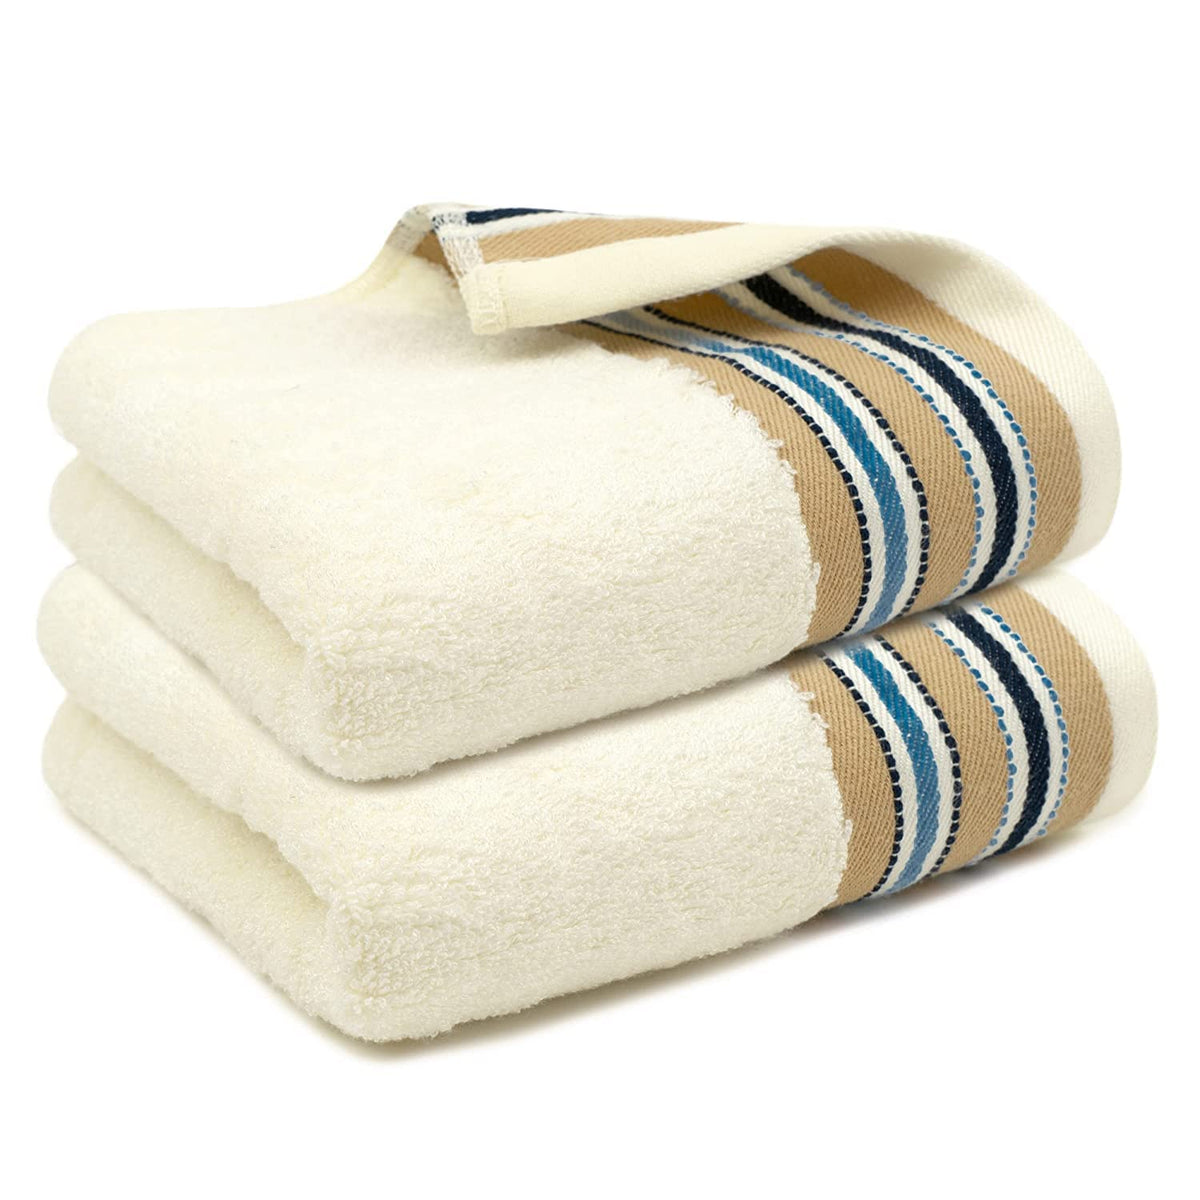 Mush Designer Bamboo Hand Towels |Ultra Soft, Absorbent & Quick Dry Towels For Bath, Spa And Yoga (Pearl White, Hand Towelset Of 2, 250 Gsm)